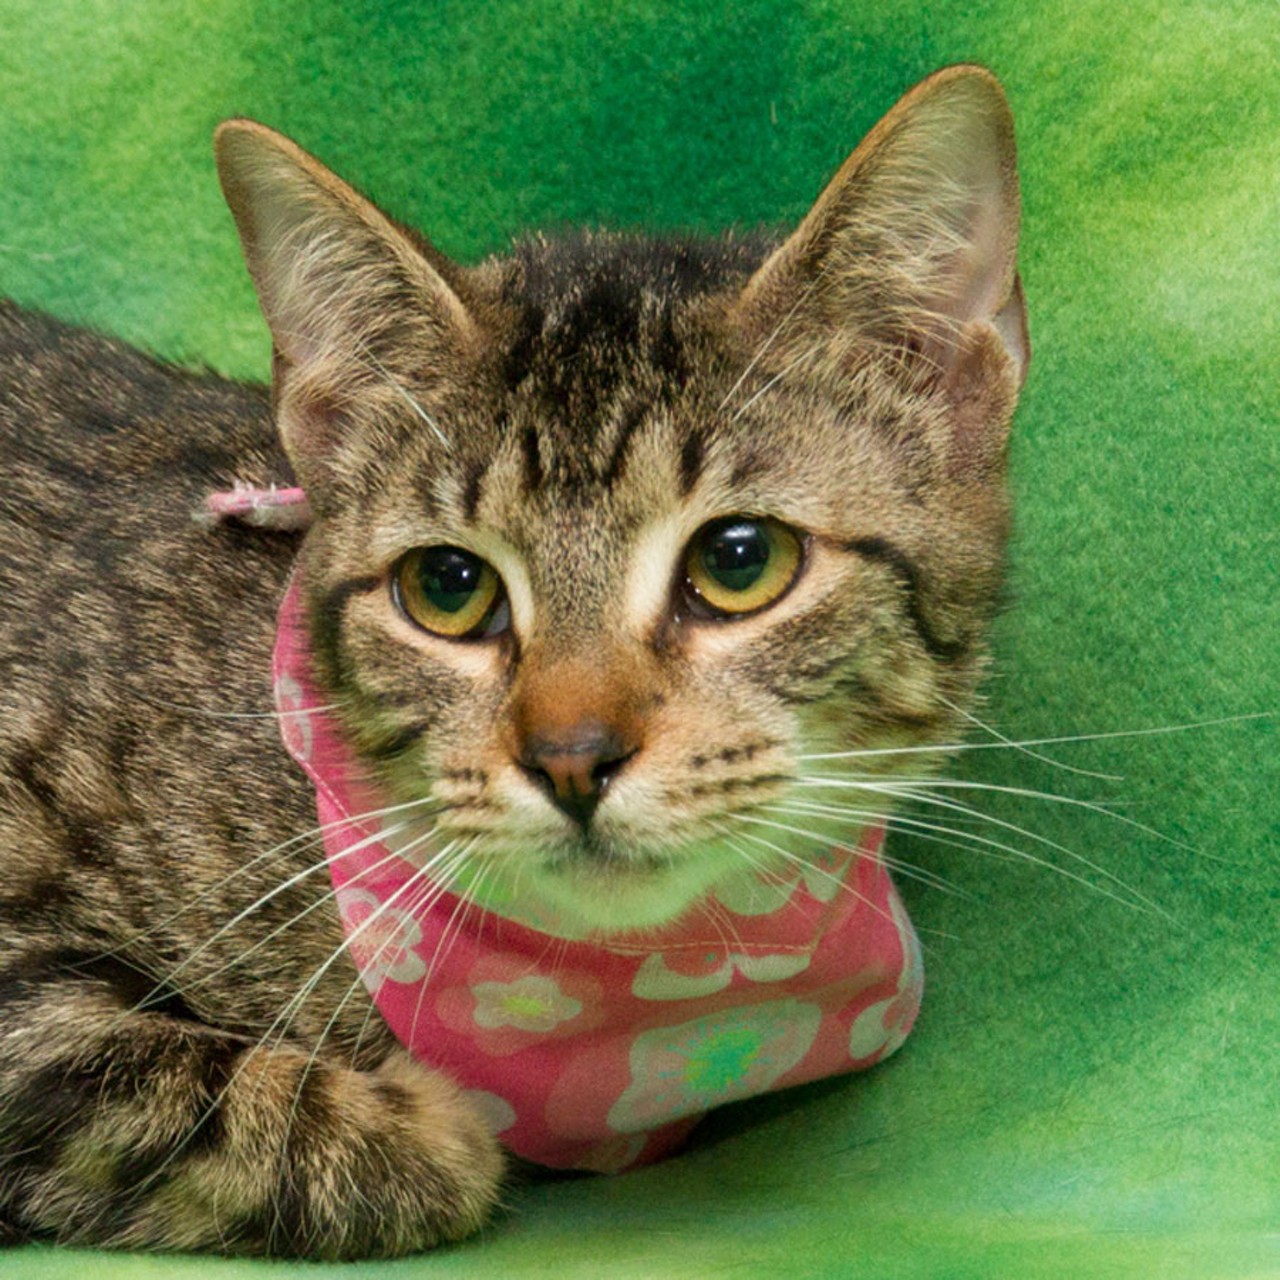 NAME: Pepper
GENDER: Female
BREED: Domestic Short Hair
AGE: 1 year, 7 months
WEIGHT: 6 pounds
SPECIAL CONSIDERATIONS: May prefer a home without children
REASON I CAME TO MHS: Agency transfer
LOCATION: Berman Center for Animal Care in Westland
ID NUMBER: 865890